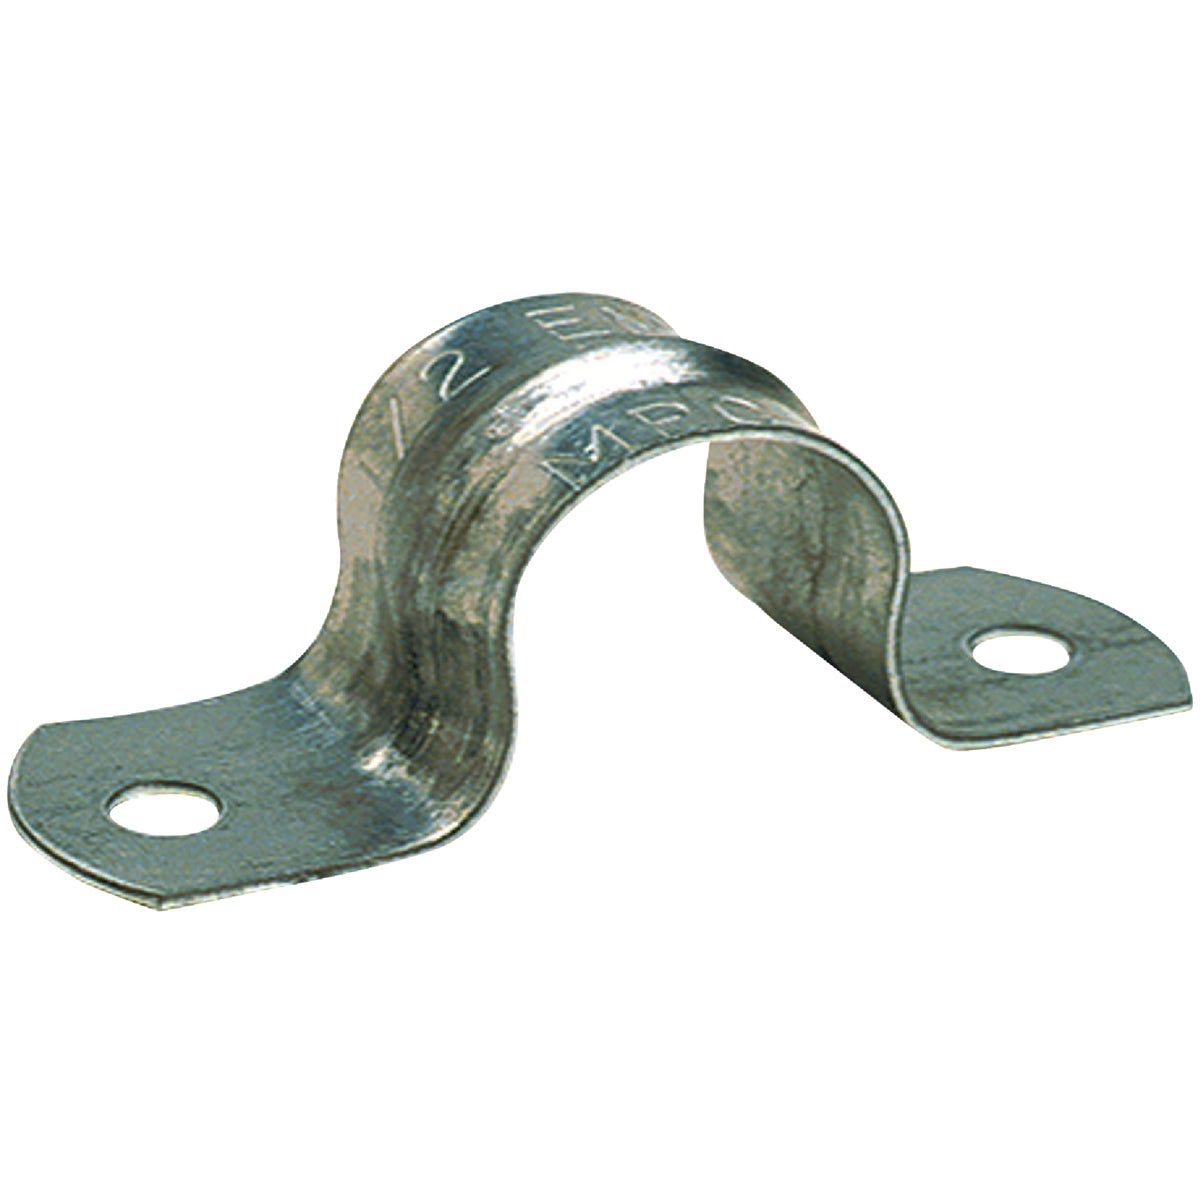 Steel City 1 In. Click-On EMT 2-Hole Conduit Strap